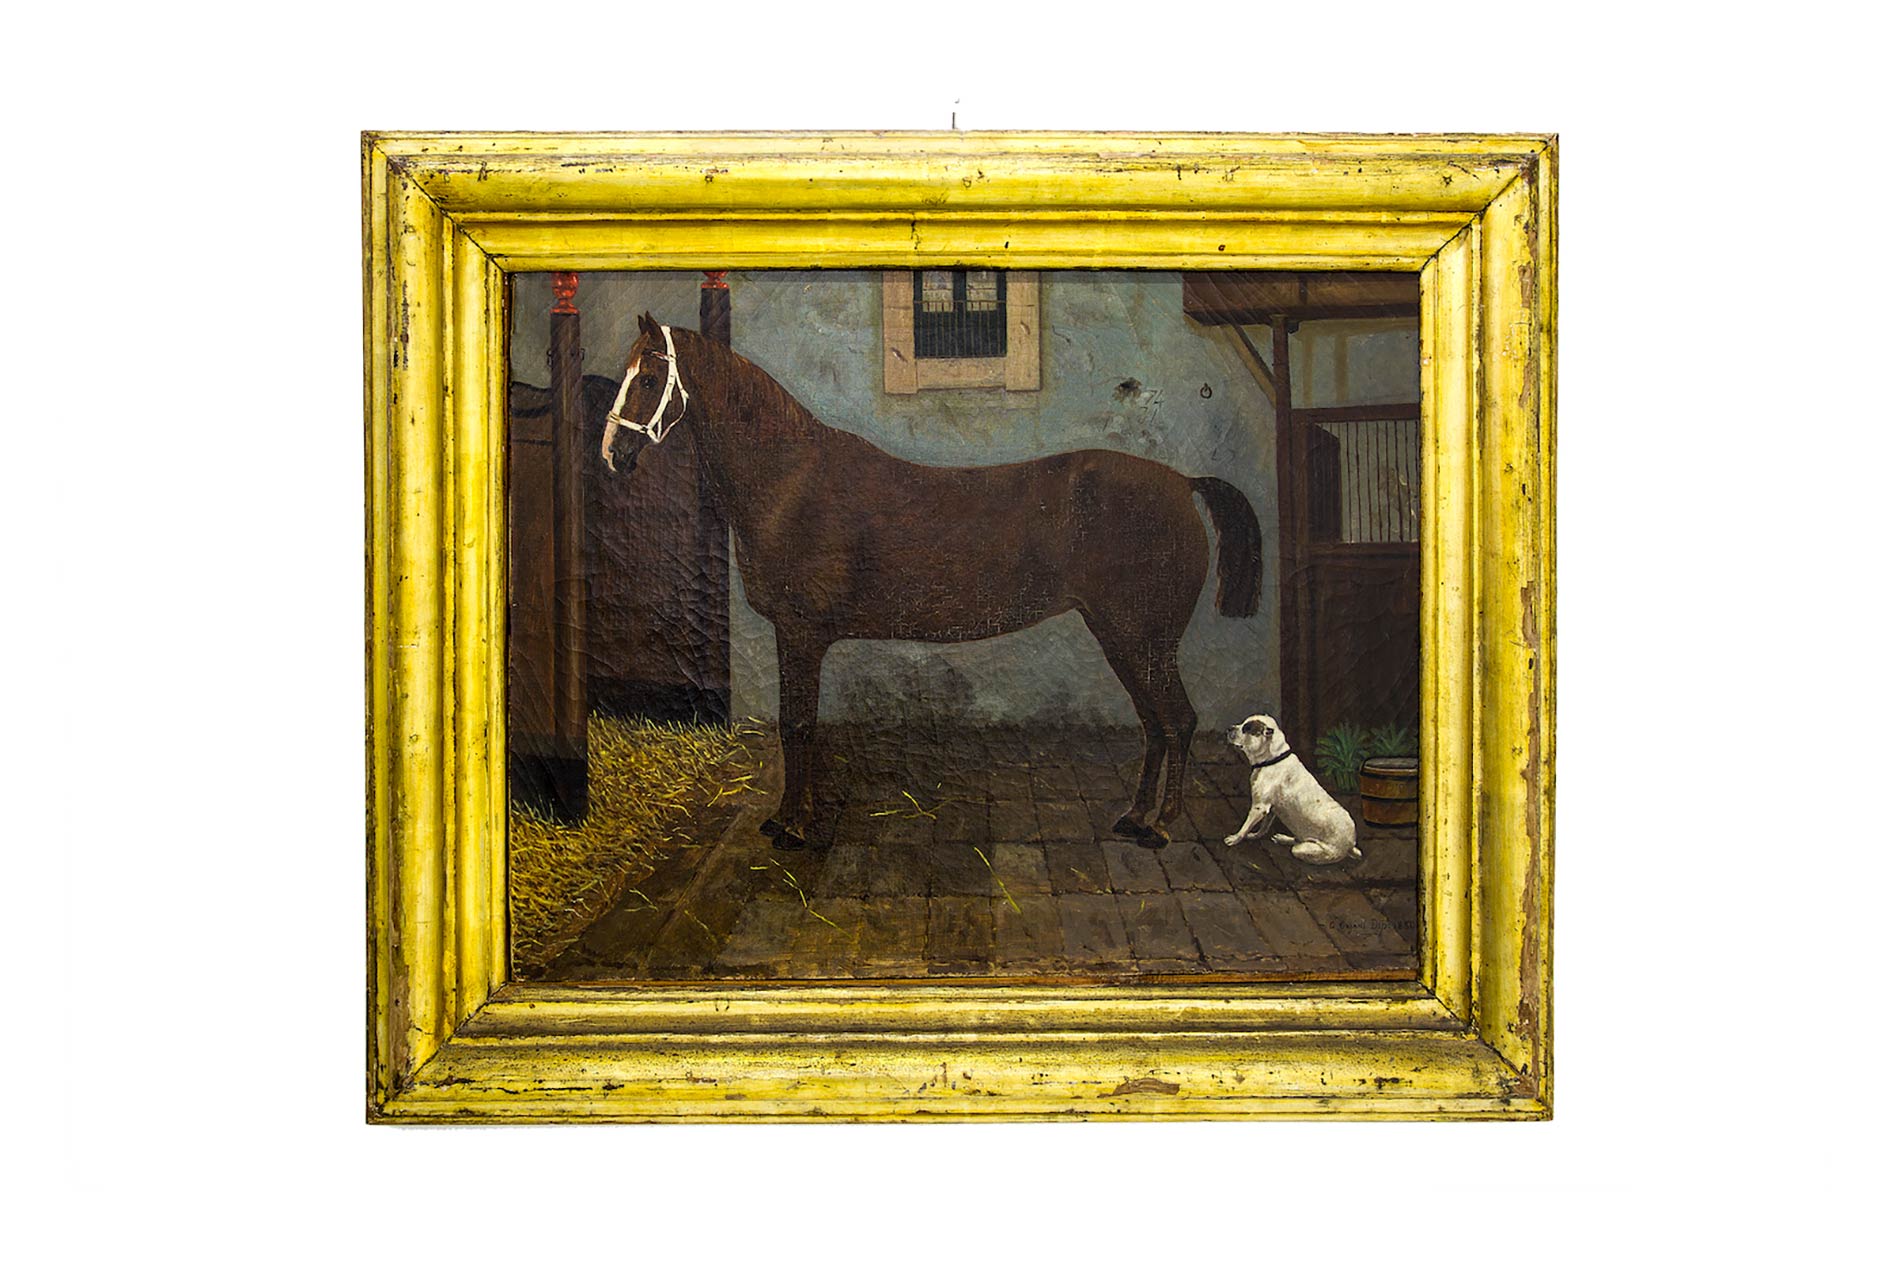 G. Cajani. Horse and dog. 53x70, Oil painting on canvas. Signed and dated 1880 on the bottom right.